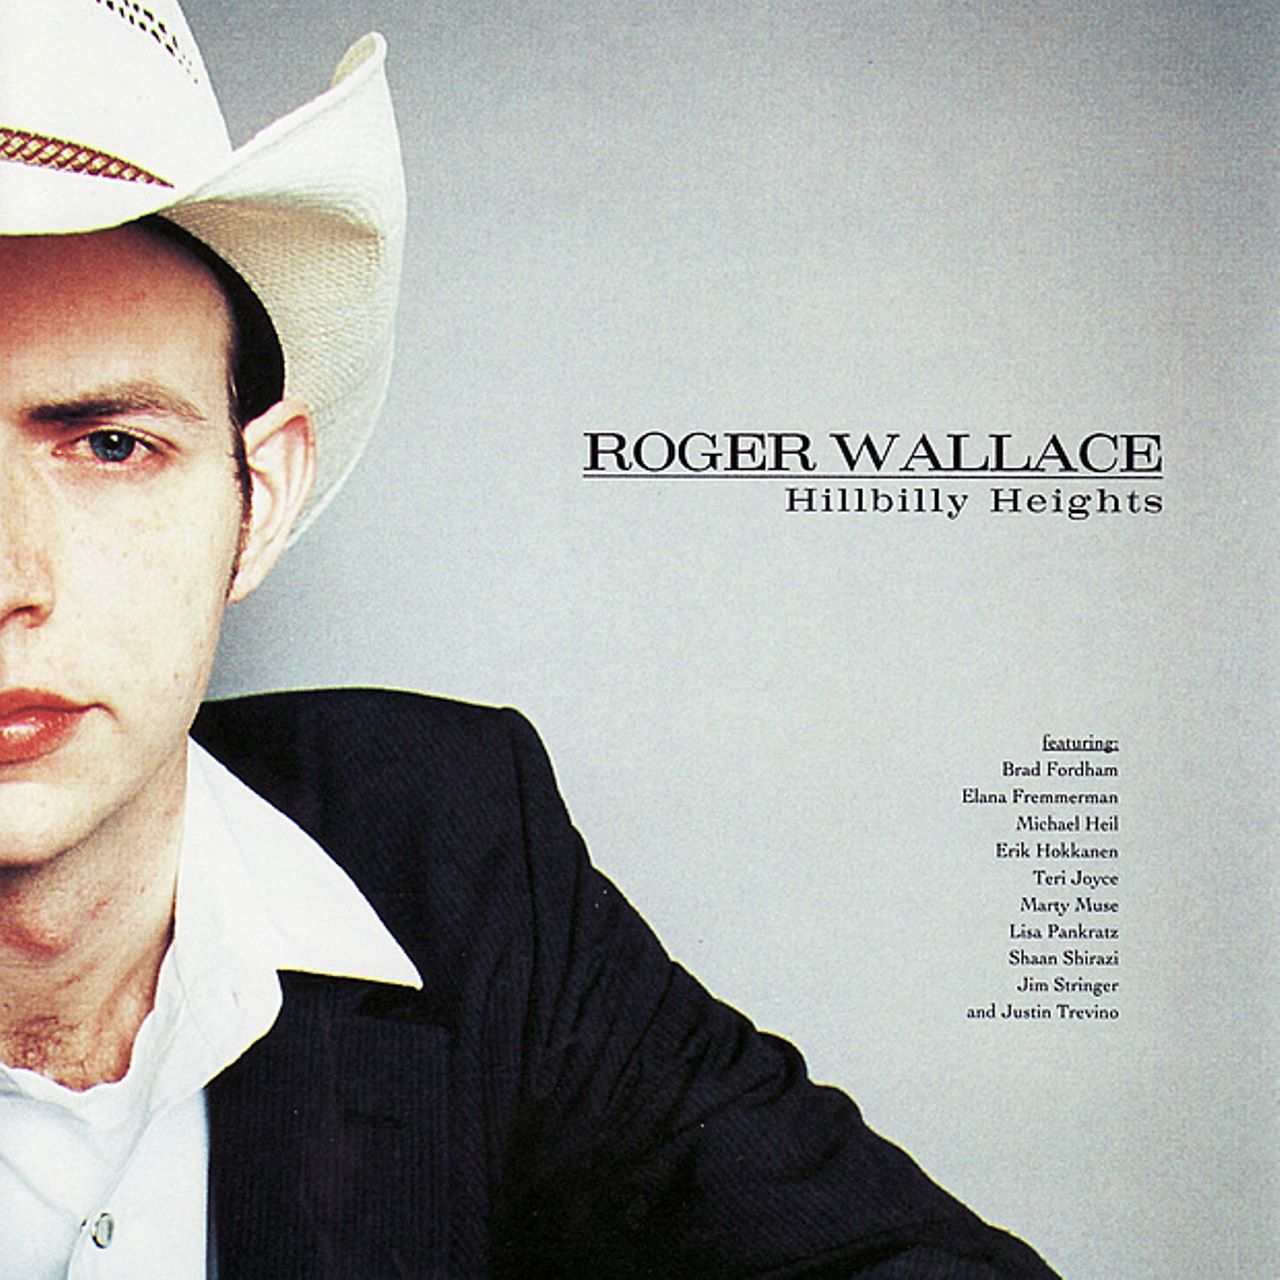 Roger Wallace - Hillbilly Heights cover album